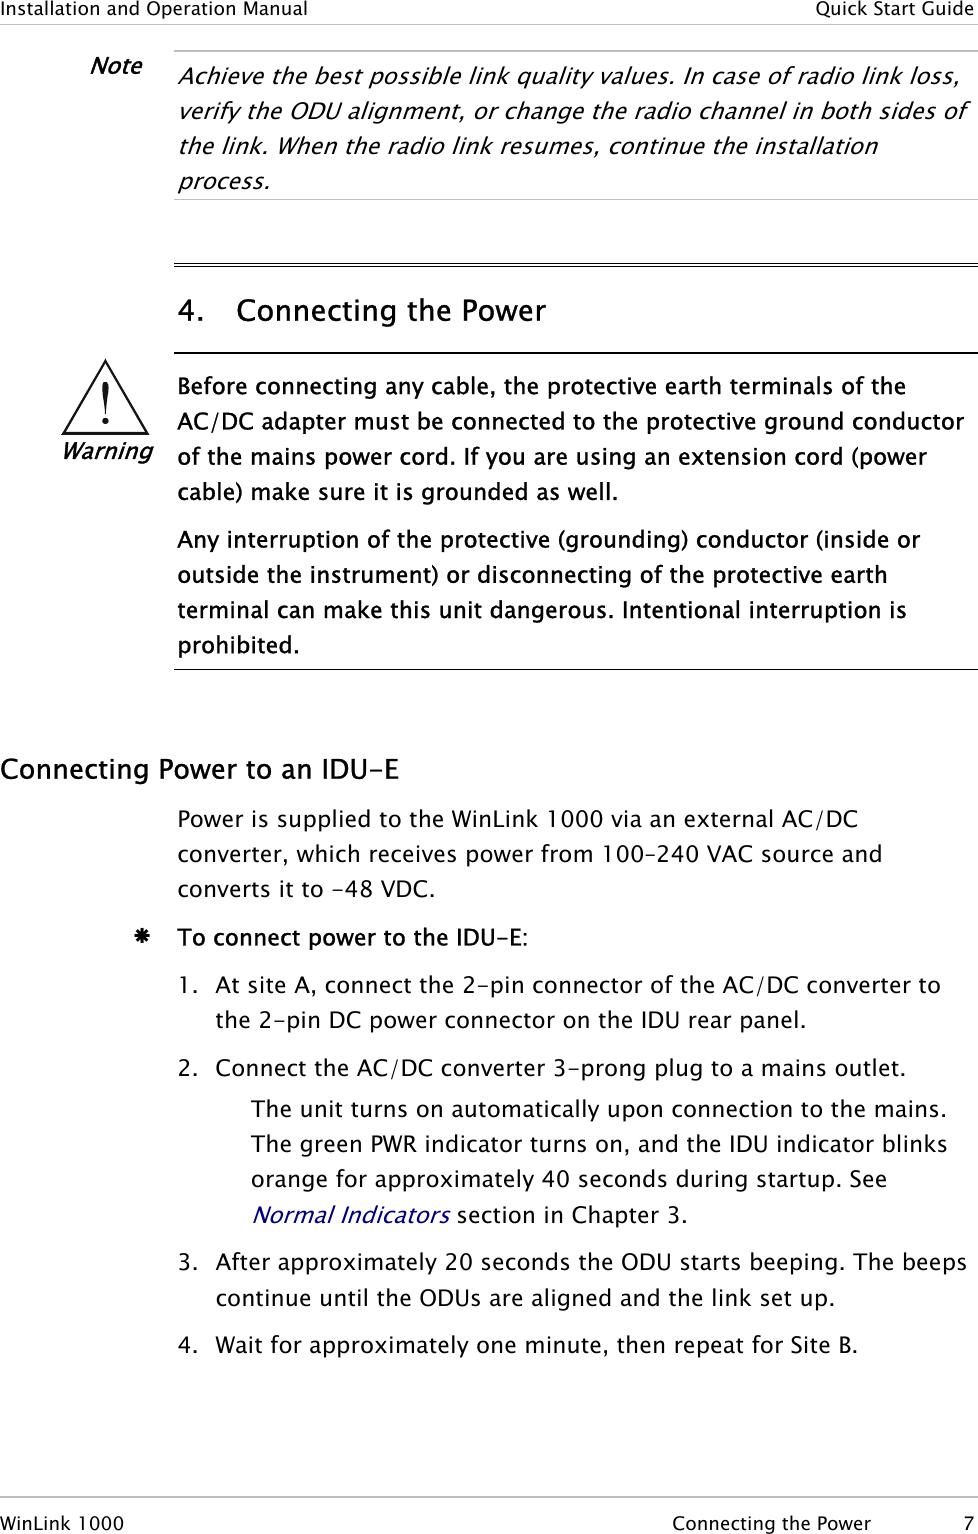 Installation and Operation Manual   Quick Start Guide Note  Achieve the best possible link quality values. In case of radio link loss, verify the ODU alignment, or change the radio channel in both sides of the link. When the radio link resumes, continue the installation process.  4. Connecting the Power  Warning Before connecting any cable, the protective earth terminals of the AC/DC adapter must be connected to the protective ground conductor of the mains power cord. If you are using an extension cord (power cable) make sure it is grounded as well. Any interruption of the protective (grounding) conductor (inside or outside the instrument) or disconnecting of the protective earth terminal can make this unit dangerous. Intentional interruption is prohibited.   Connecting Power to an IDU-E Power is supplied to the WinLink 1000 via an external AC/DC converter, which receives power from 100–240 VAC source and converts it to -48 VDC. Æ To connect power to the IDU-E: 1. At site A, connect the 2-pin connector of the AC/DC converter to the 2-pin DC power connector on the IDU rear panel.  2. Connect the AC/DC converter 3-prong plug to a mains outlet. The unit turns on automatically upon connection to the mains. The green PWR indicator turns on, and the IDU indicator blinks orange for approximately 40 seconds during startup. See Normal Indicators section in Chapter 3. 3. After approximately 20 seconds the ODU starts beeping. The beeps continue until the ODUs are aligned and the link set up. 4. Wait for approximately one minute, then repeat for Site B. WinLink 1000  Connecting the Power  7 